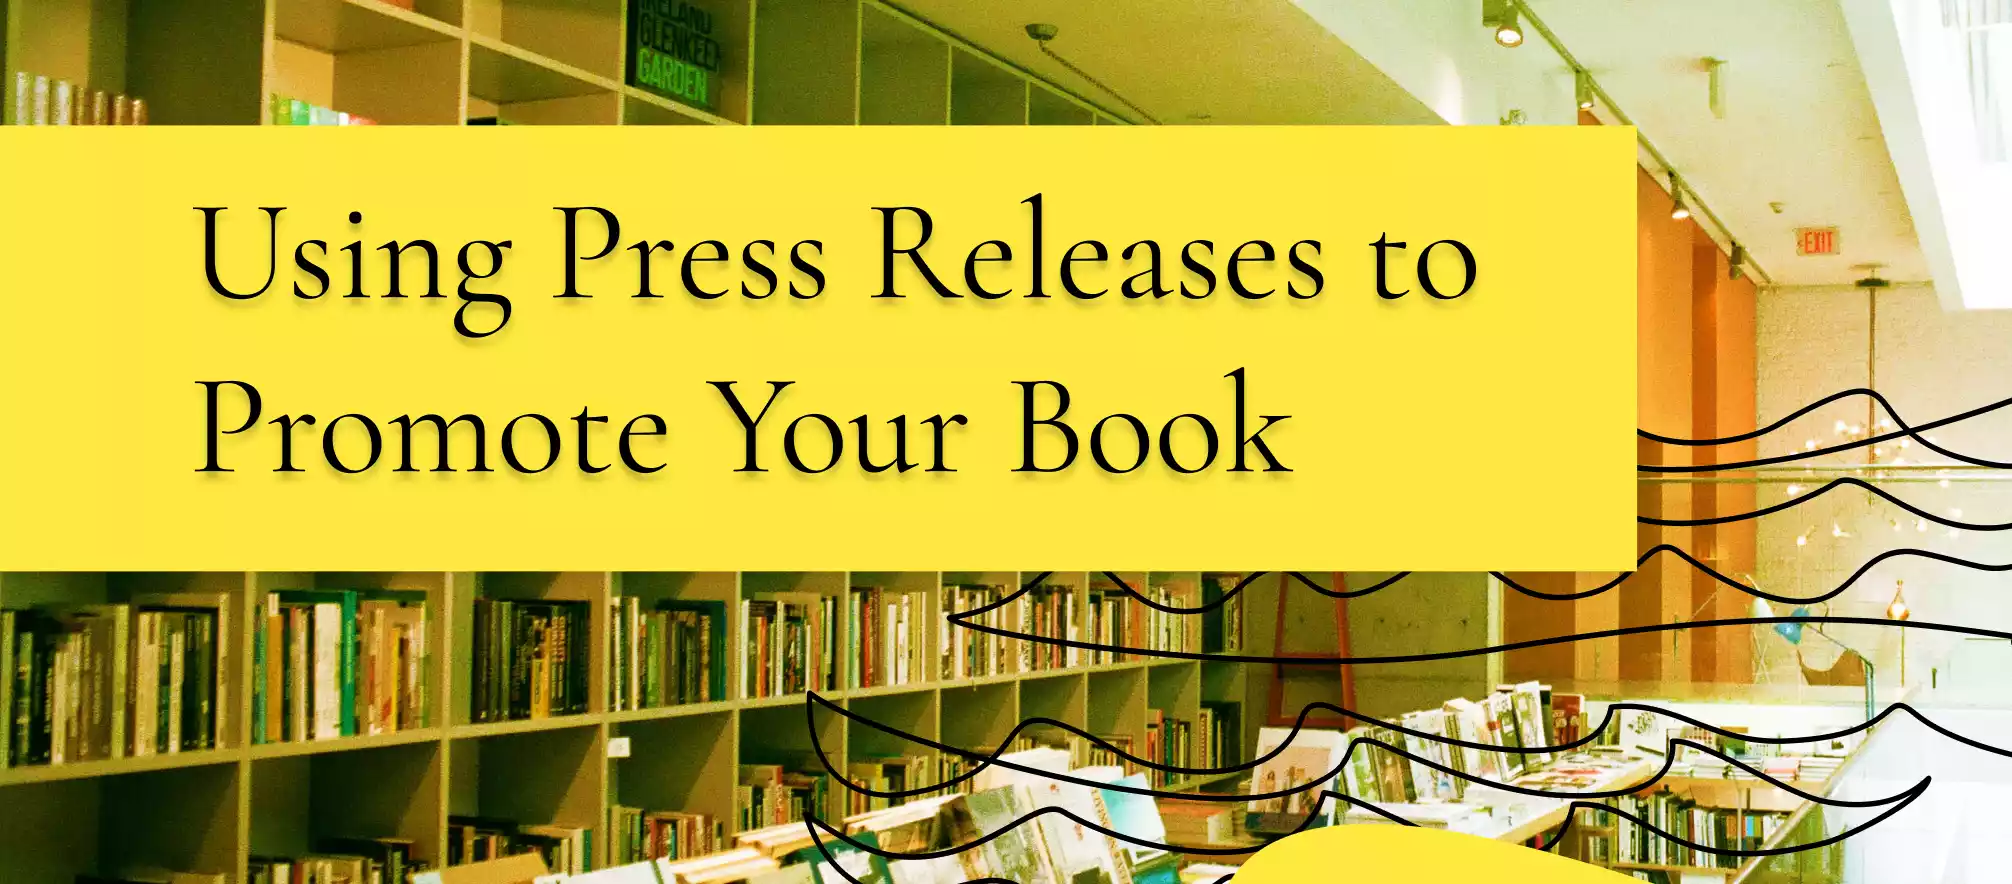 7 Tips for Writing a Press Release to Market Your Book